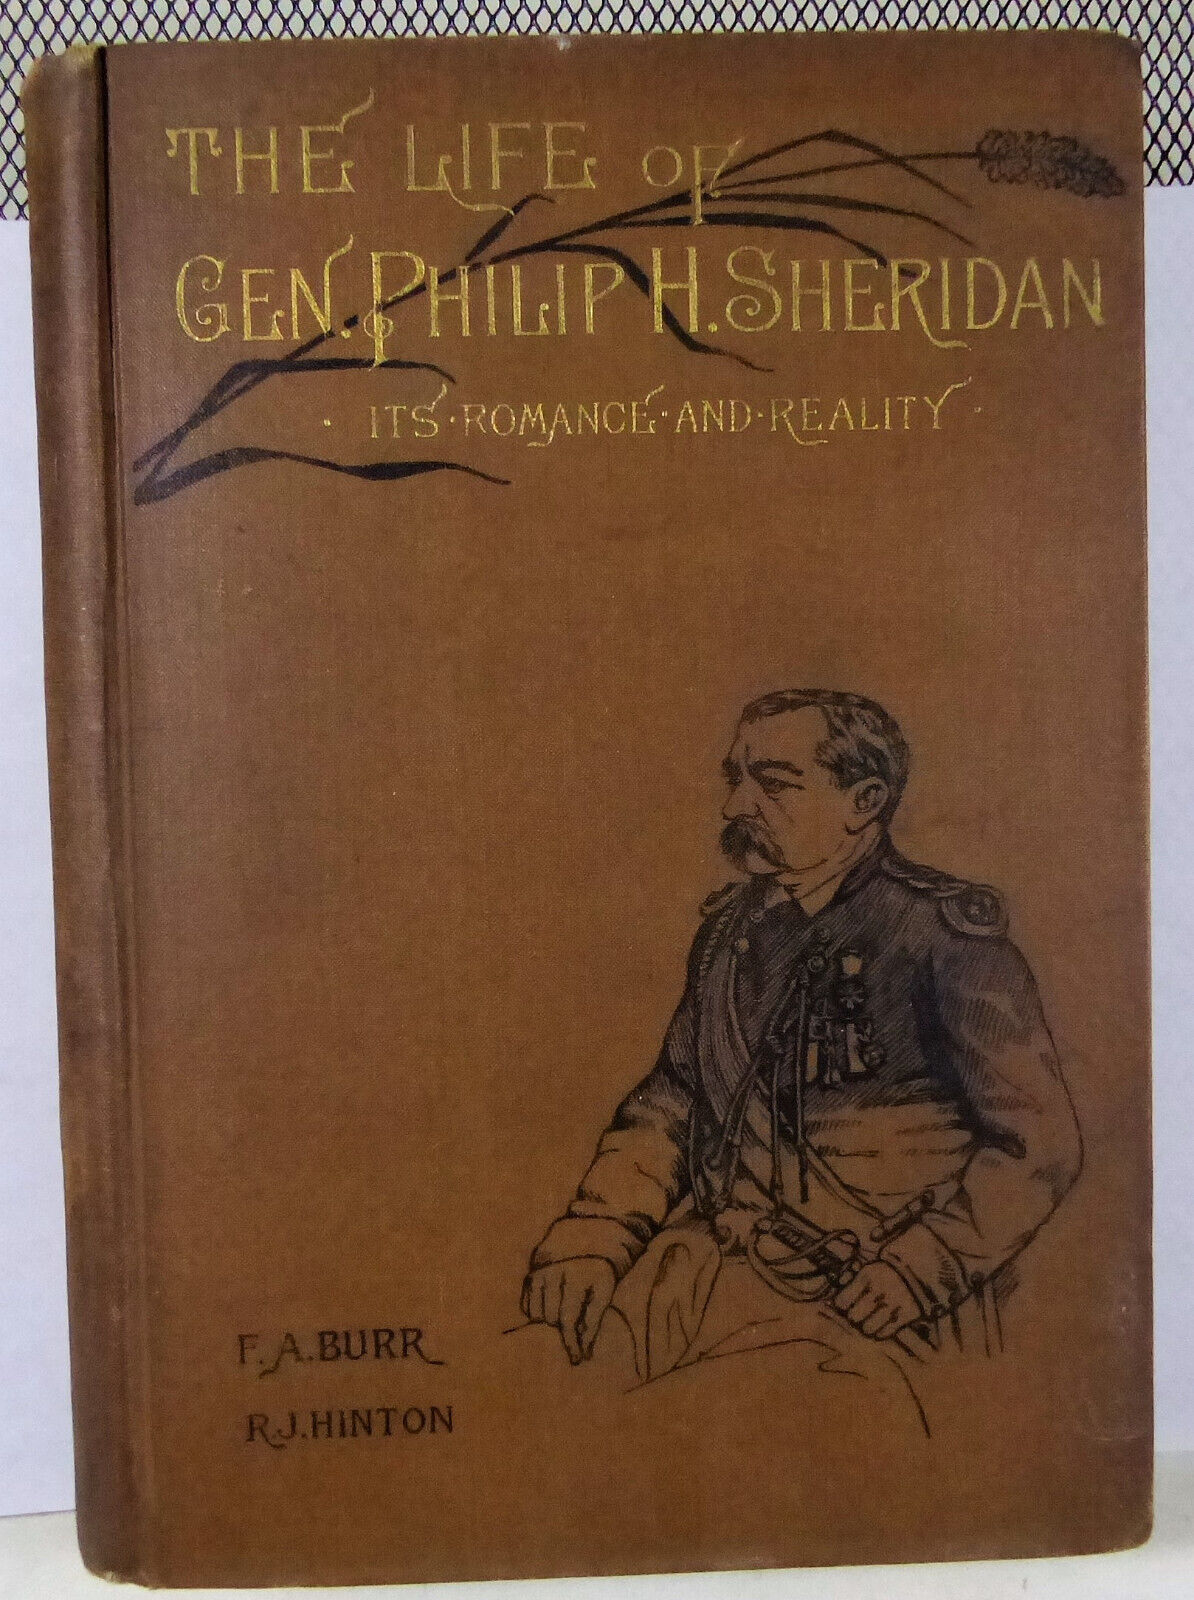 Rare   The Life of Gen. Philip H. Sheridan , its Romance and Reality , Pub 1888